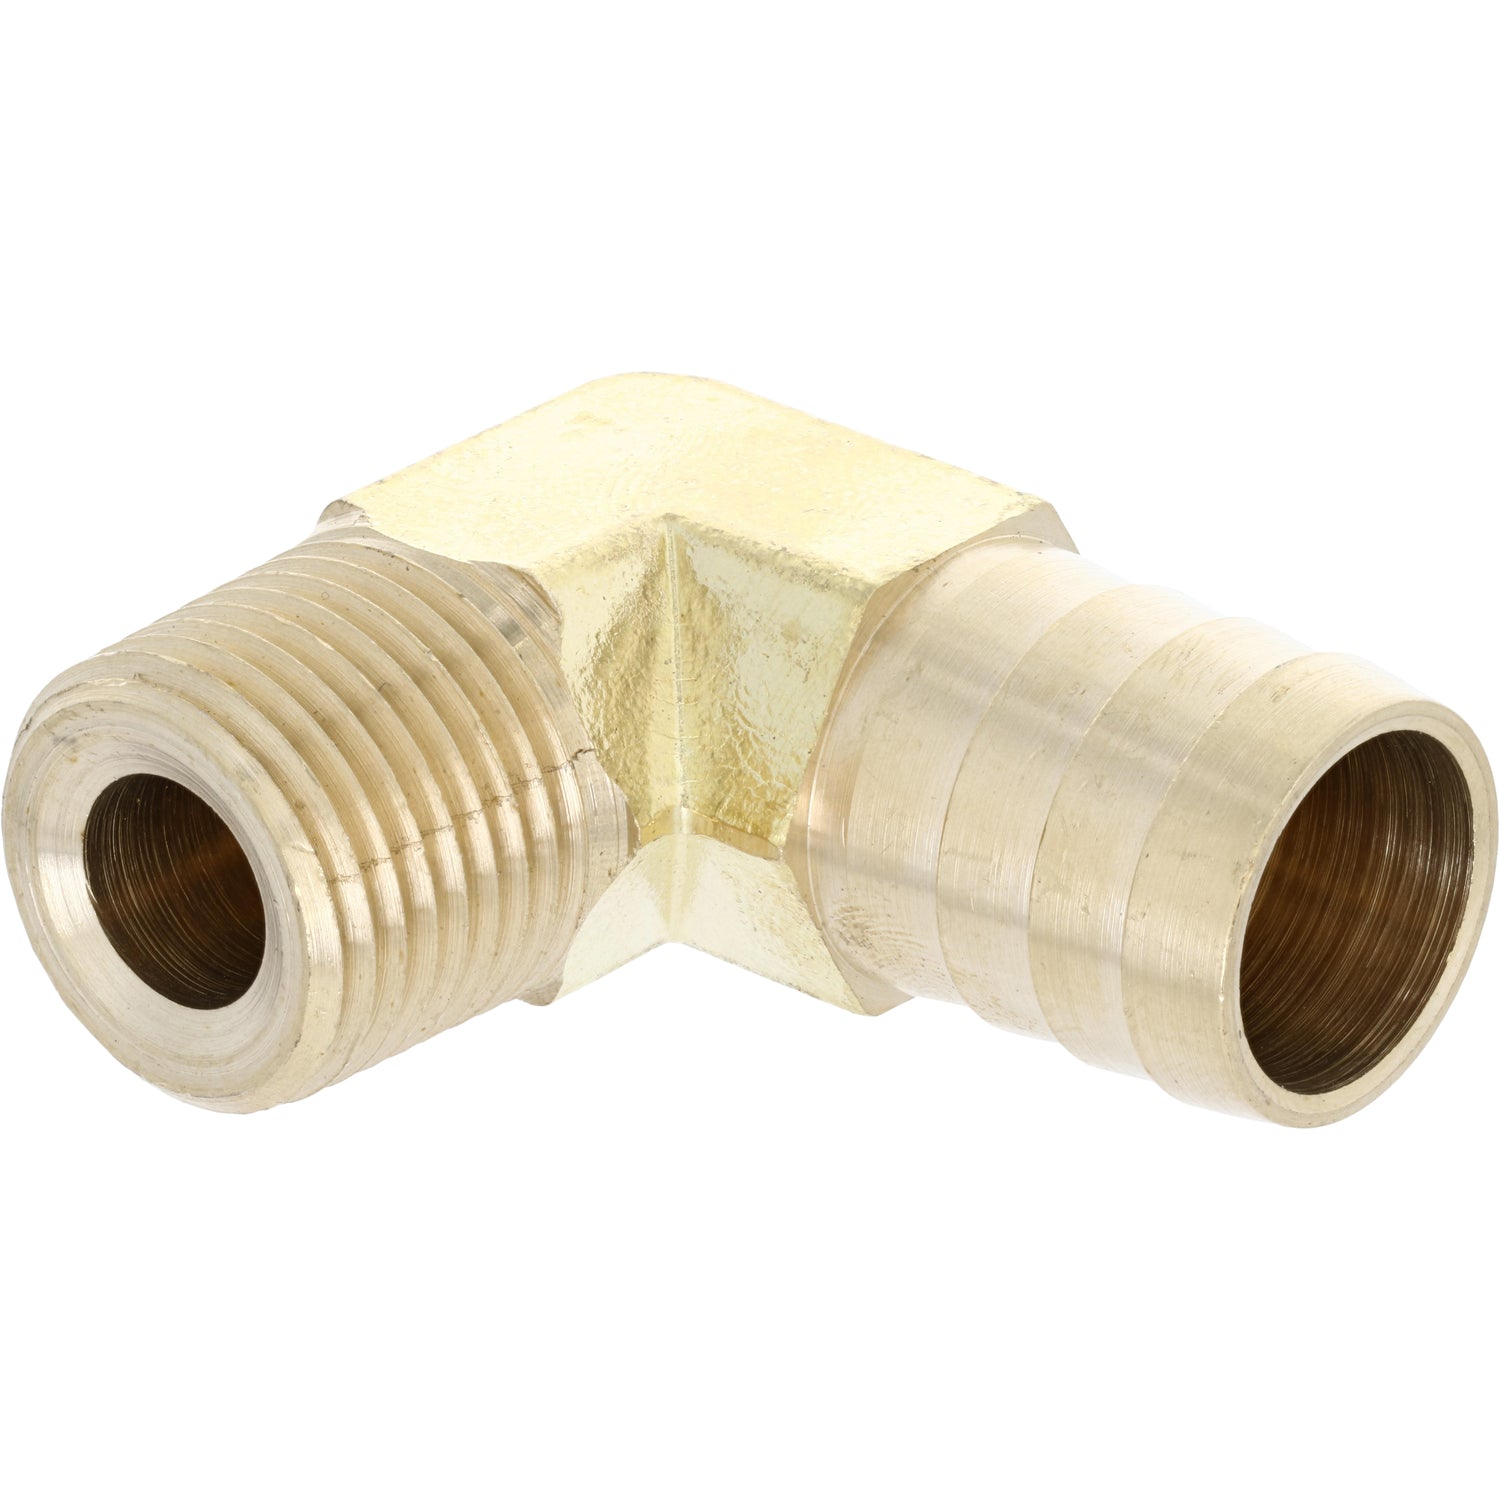 Brass 90 Degree Elbow for 3/4" hose ID x 1/2 NPTF Male on white background.  